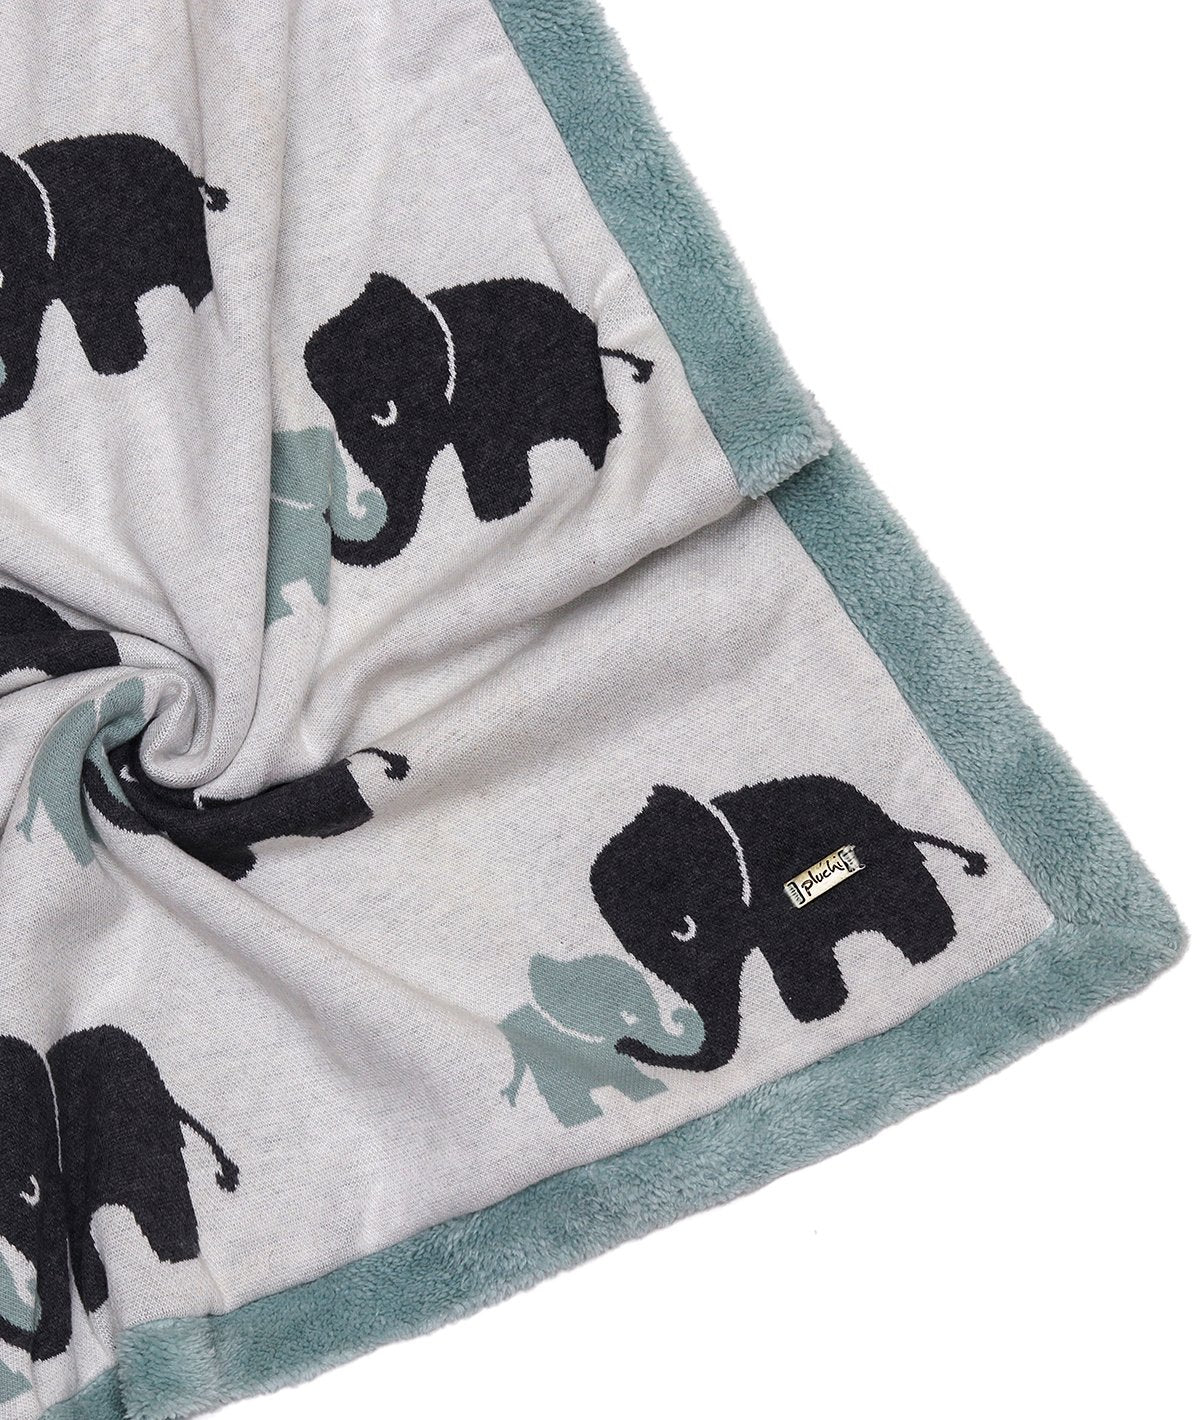 Indian Elephant - Ivory & Indus Blue Color Cotton Knitted Blanket with Faux Fur Back for Babies